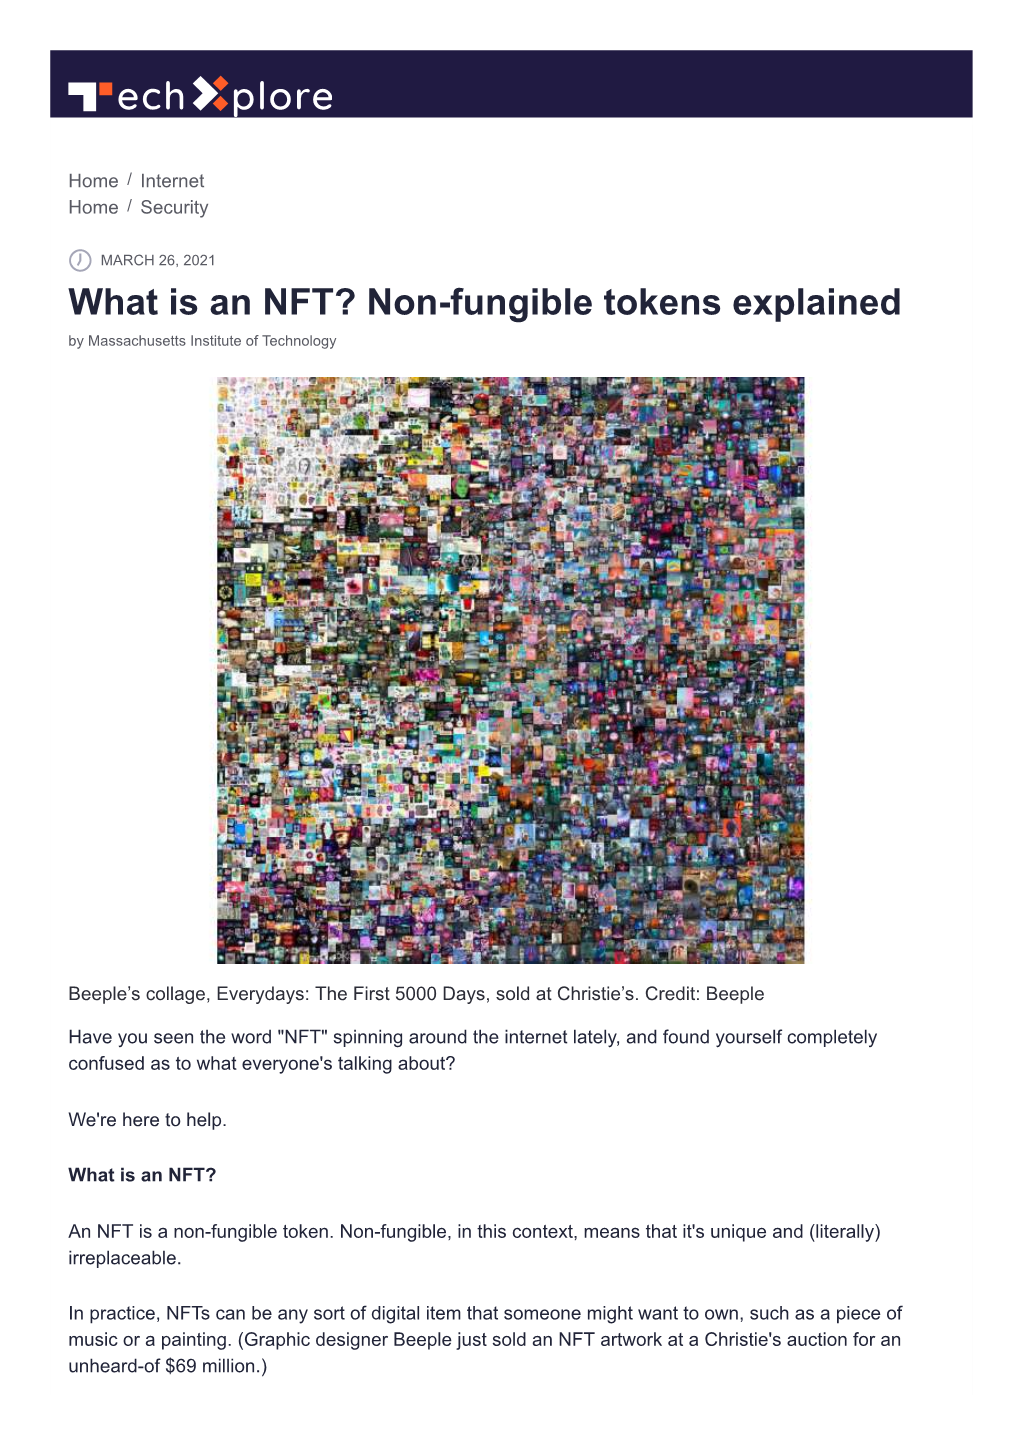 What Is an NFT? Non-Fungible Tokens Explained by Massachusetts Institute of Technology